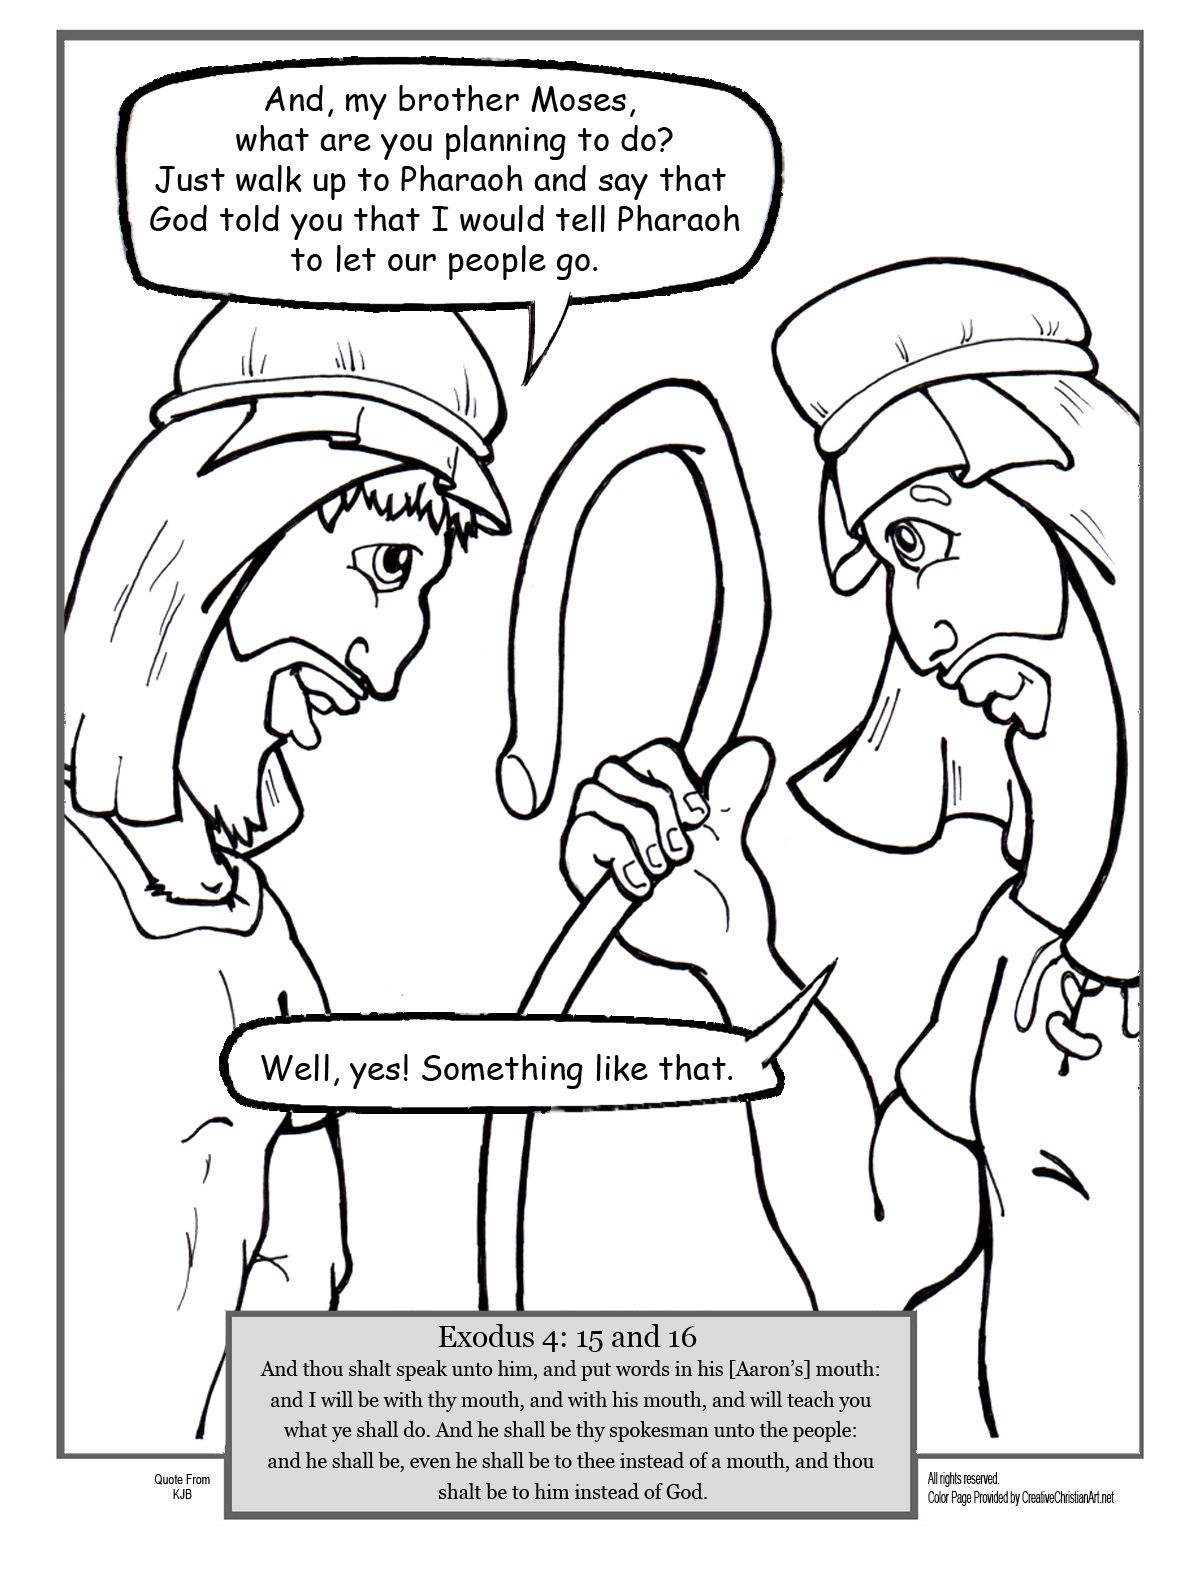 Moses and pharaoh coloring pages - upfex